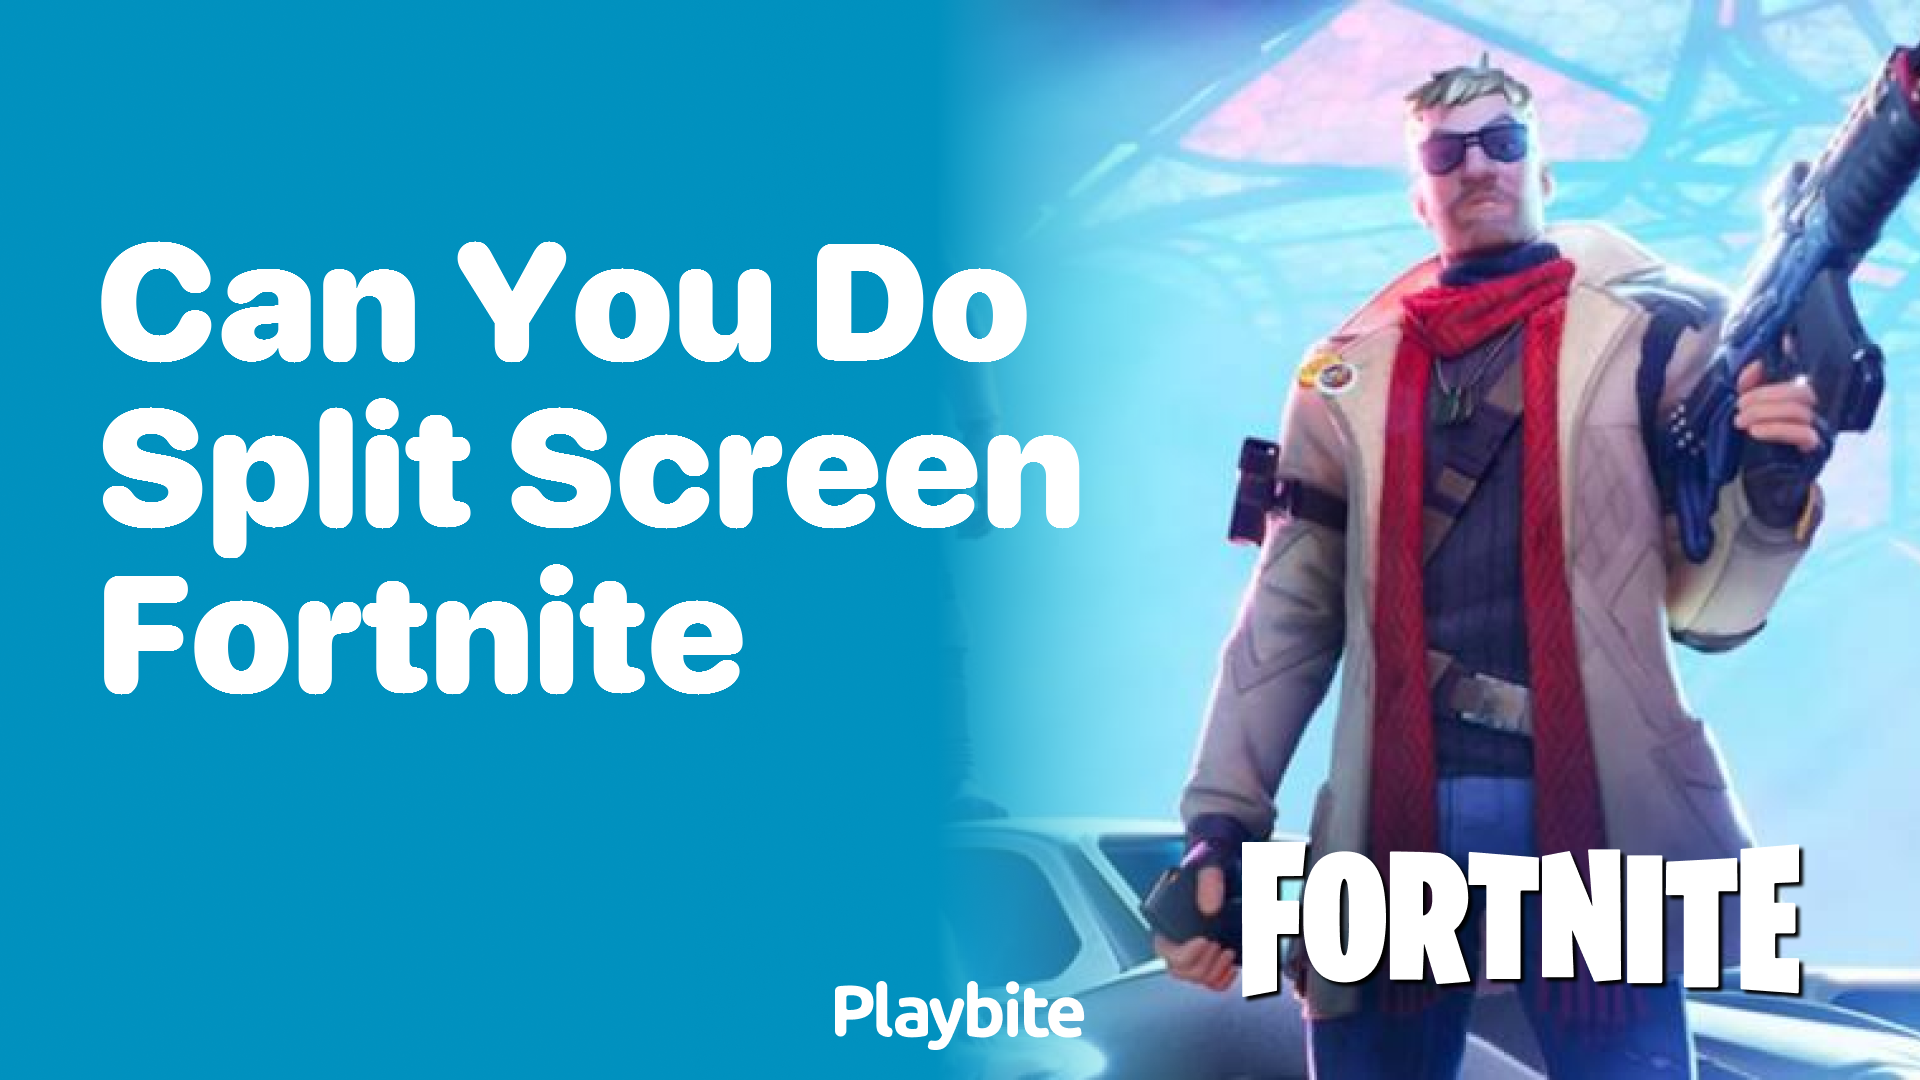 Can You Play Fortnite on Split Screen?